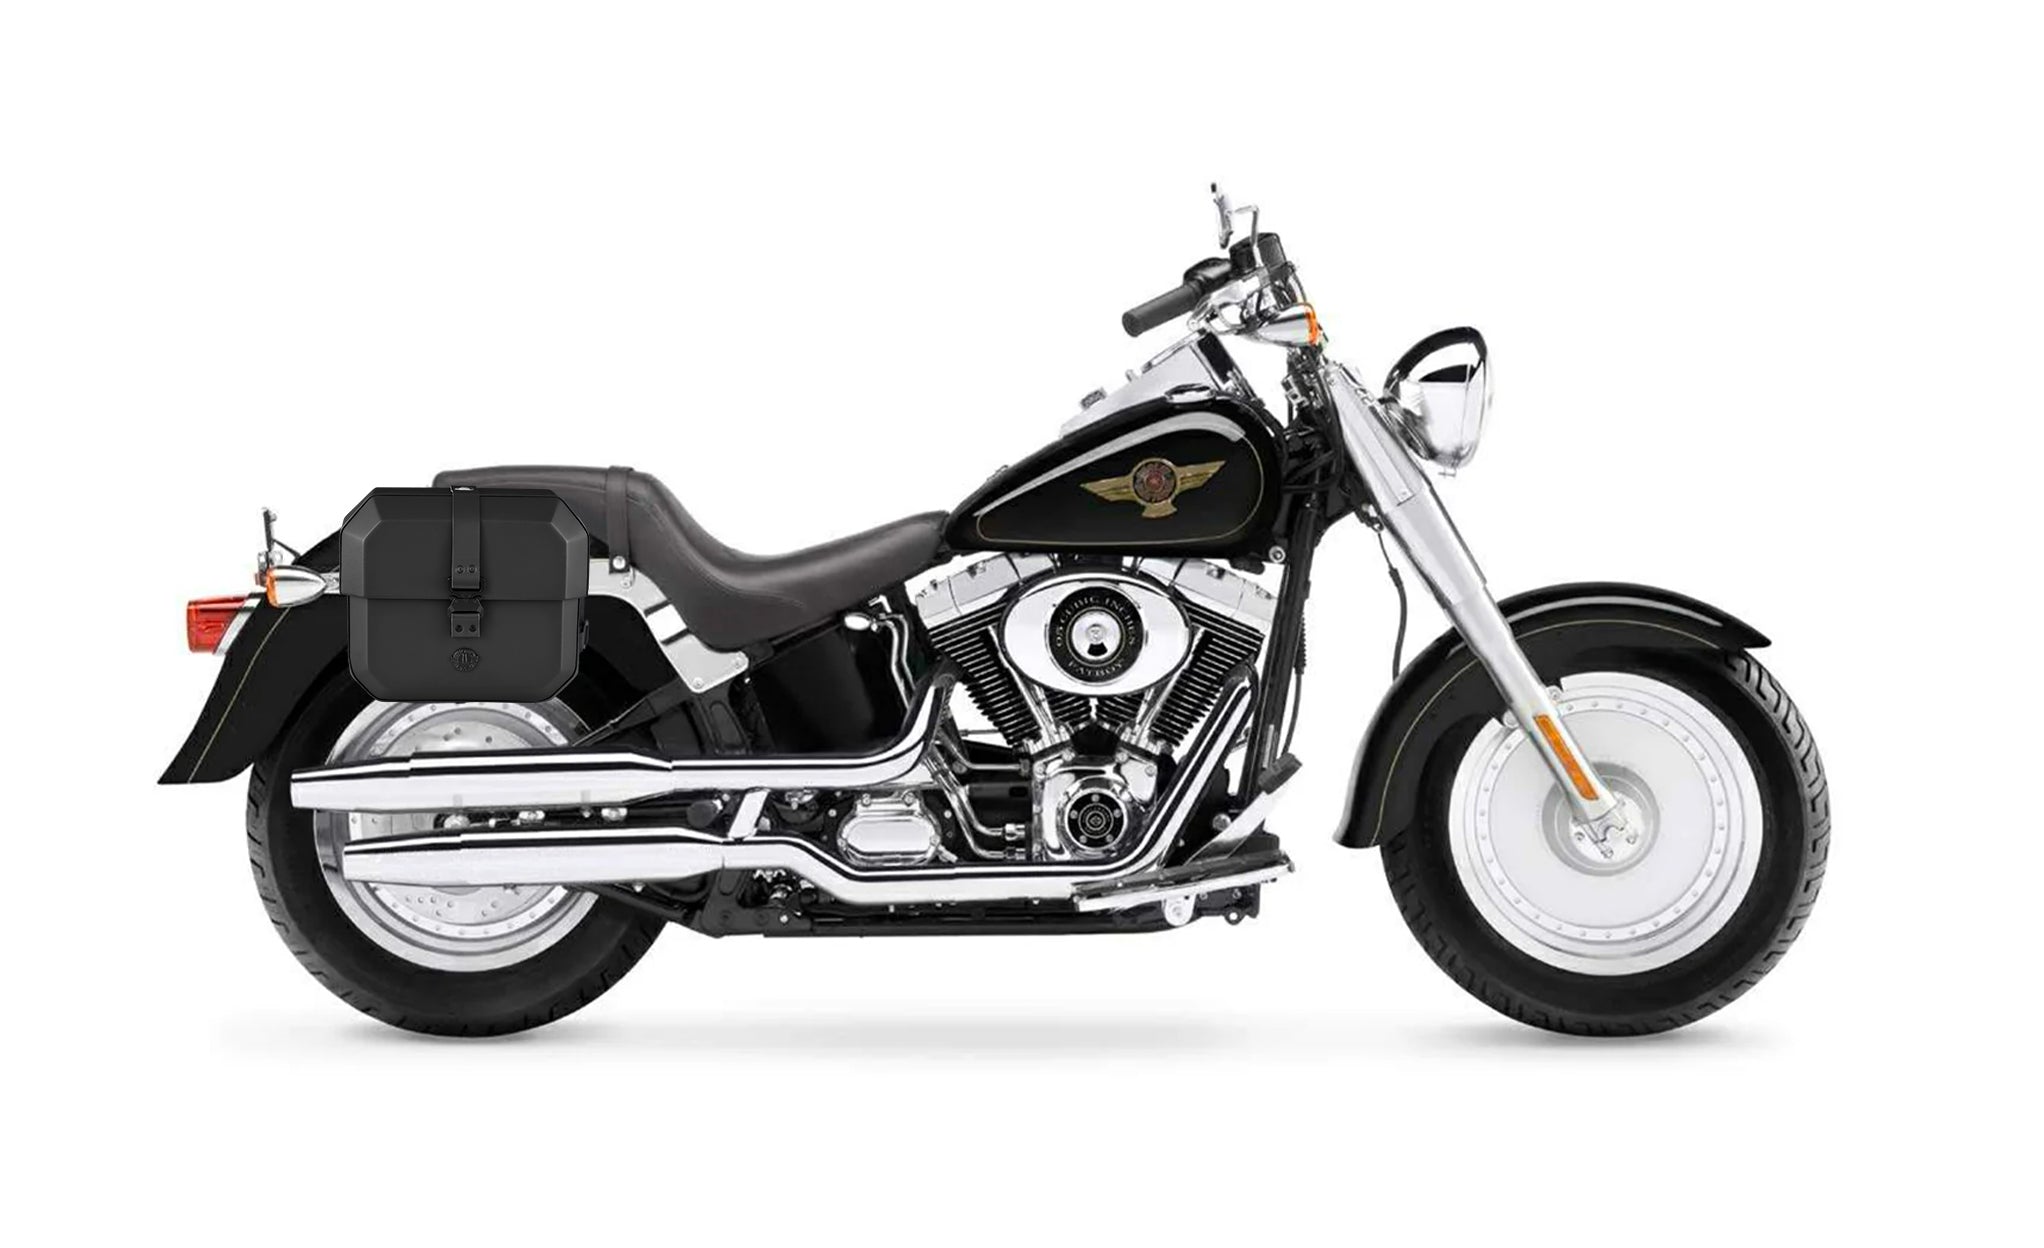 Viking 10L Outlaw Quick Mount Small Harley Softail Fat Boy Flstf I Hard Solo Saddlebag Right Only Bag on Bike @expand